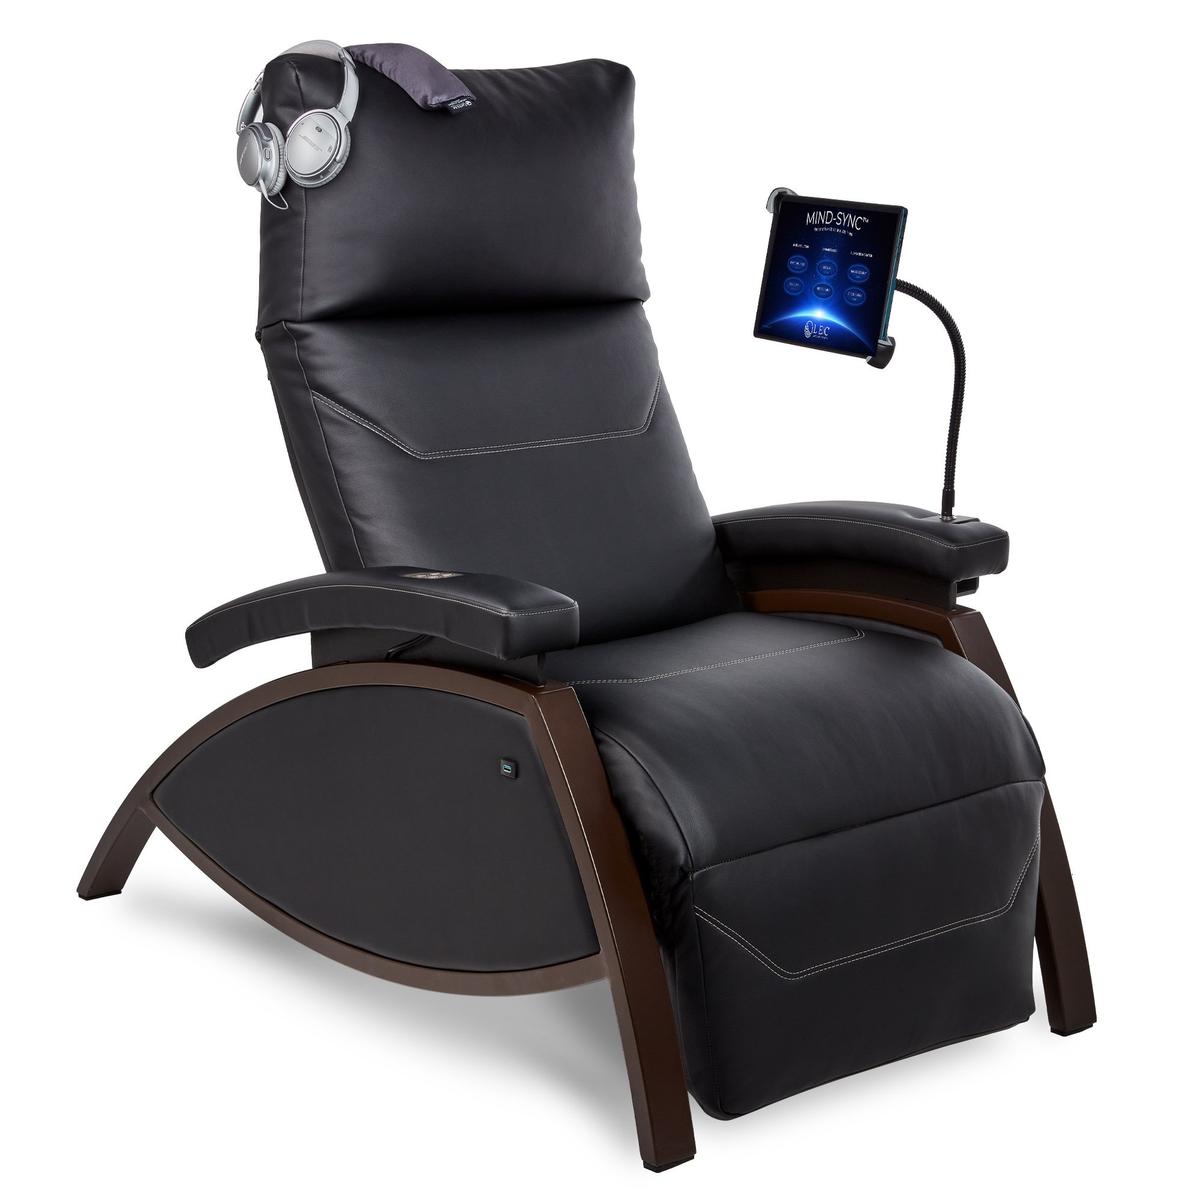 The Mind-Sync Lounger is now available for delivery in February with an MSRP set at US$9,950 (€8,830, £7,542)
/ 